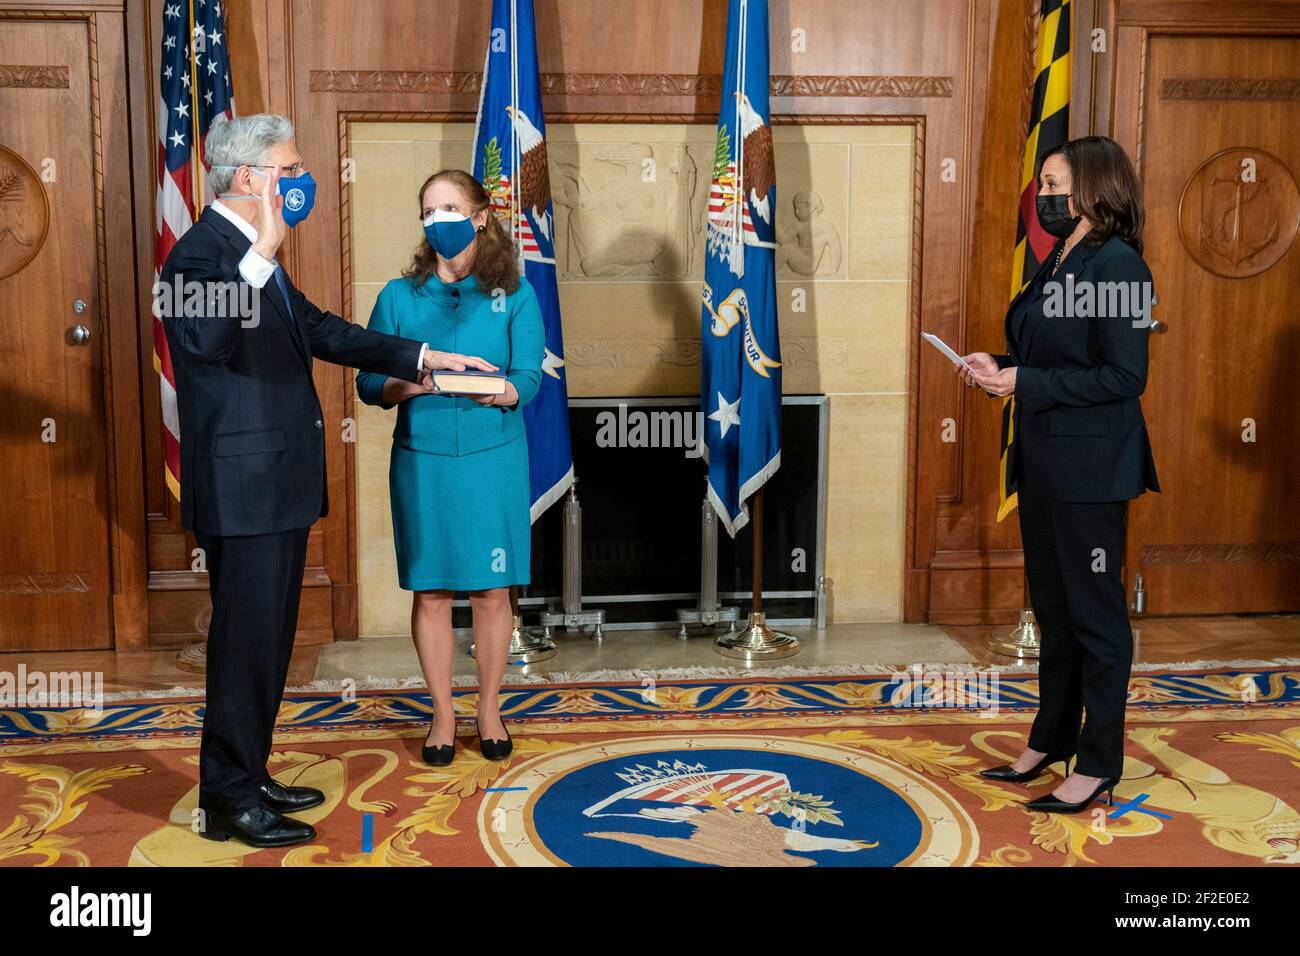 Washington, United States Of America. 11th Mar, 2021. U.S Vice President Kamala Harris, holds a ceremonial swearing-in for Attorney general Merrick Garland, as his wife Lynn Garland holds the bible, at the Department of Justice March 11, 2021 in Washington, DC Credit: Planetpix/Alamy Live News Stock Photo